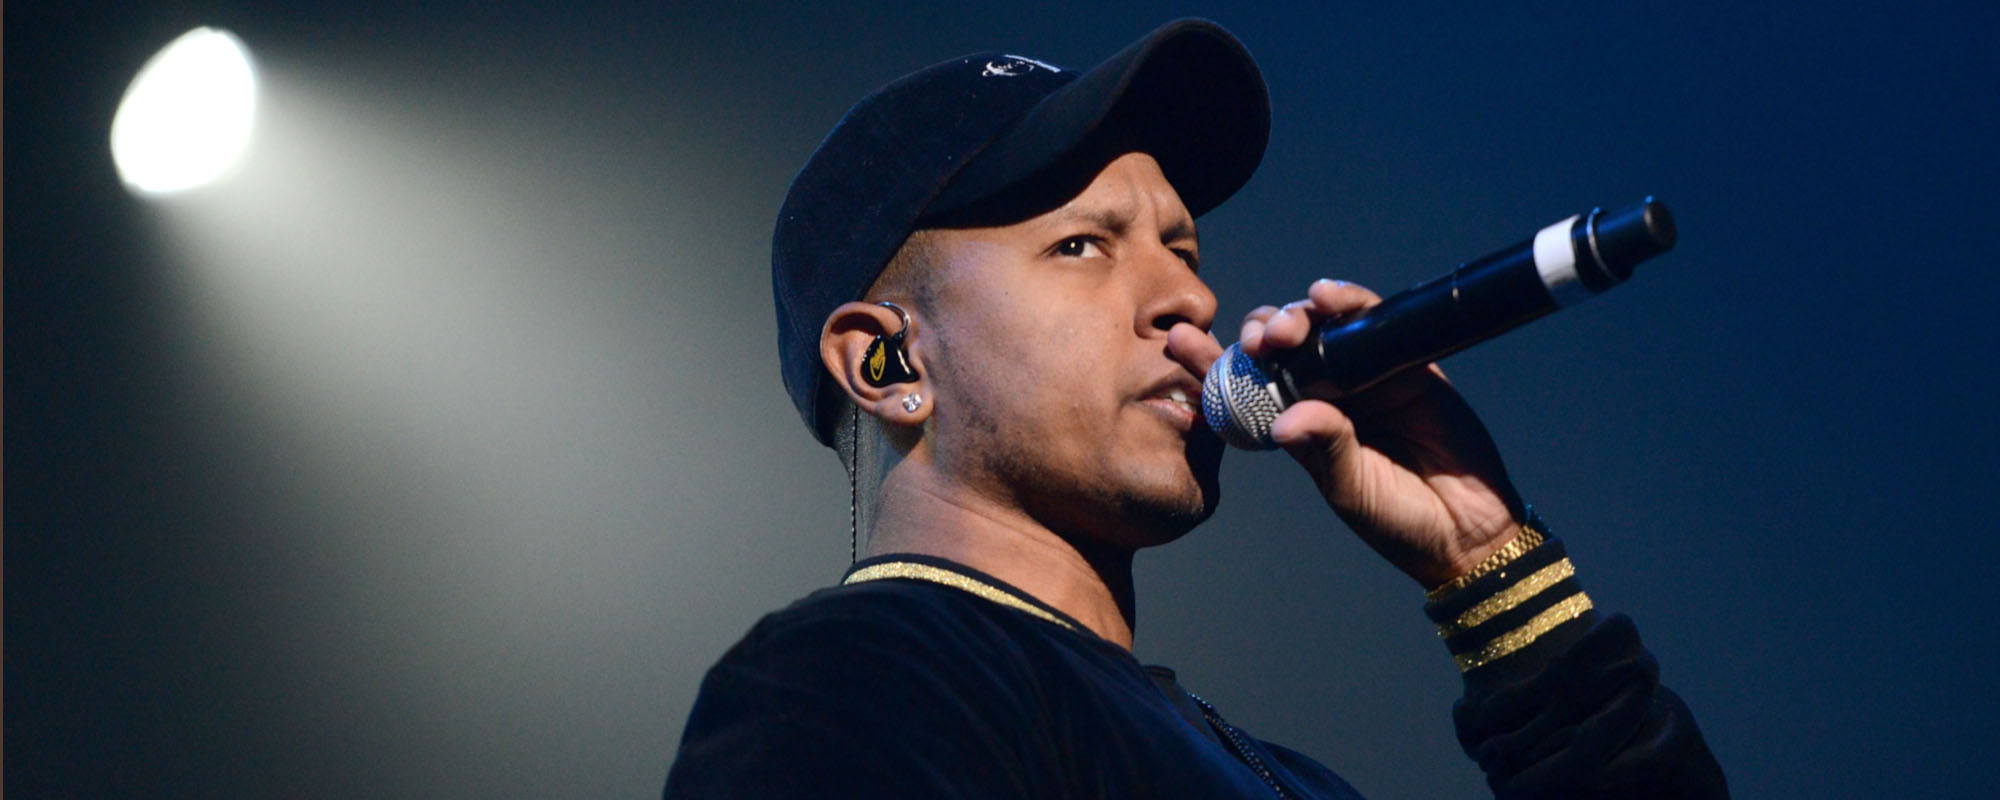 Reach Records Drops Christian Hip-Hop Artist Gawvi Over Alleged Explicit Photos, Issues Statement